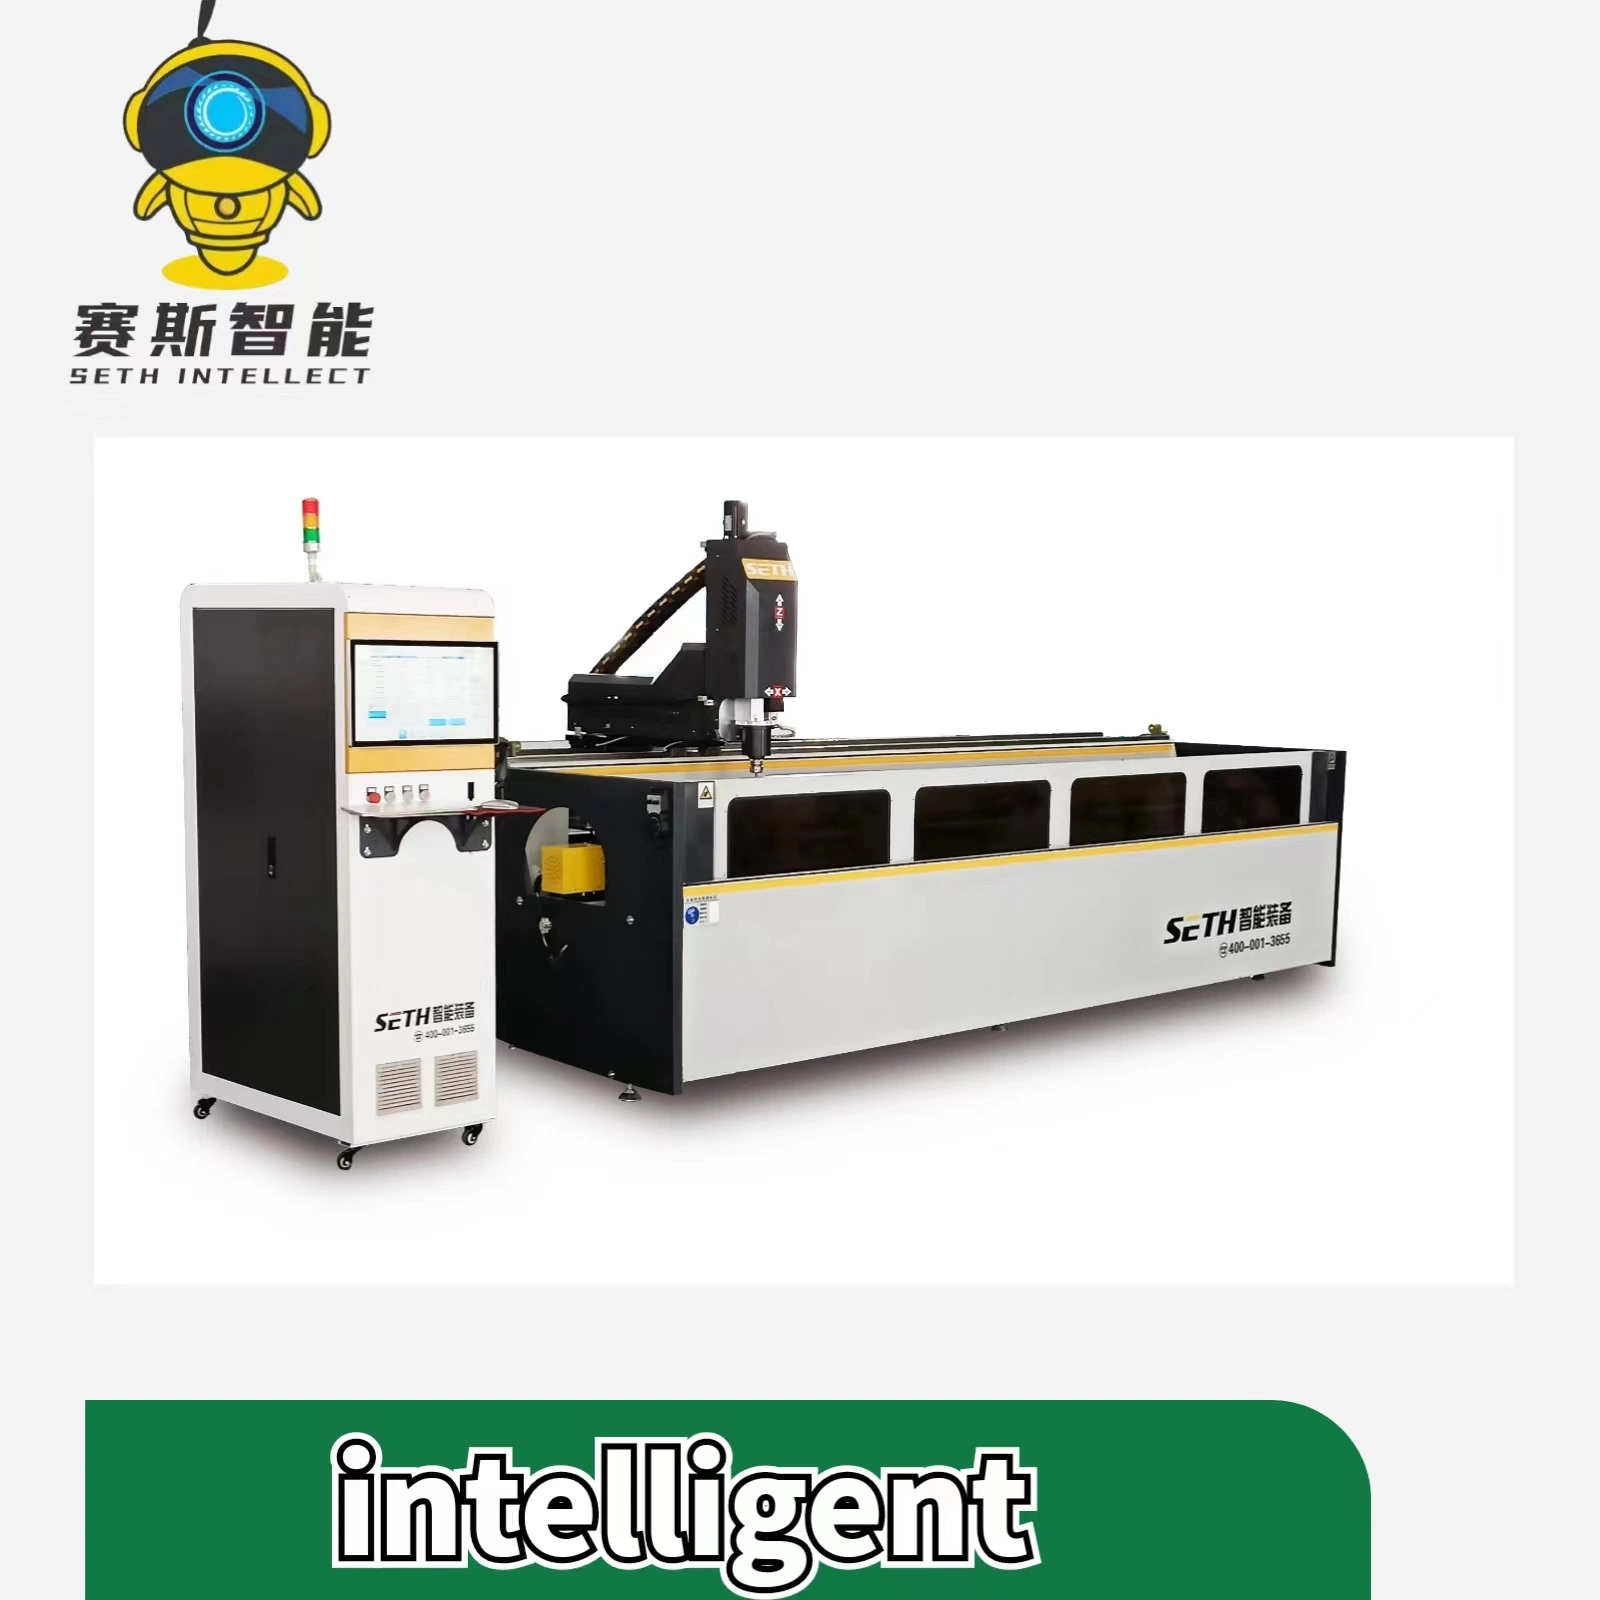 CNC Machining Center for Aerospace, Shipbuilding, Power Generation, Military Industry, Heavy Machinery, Locomotives, Textile Machinery, Printing Machinery